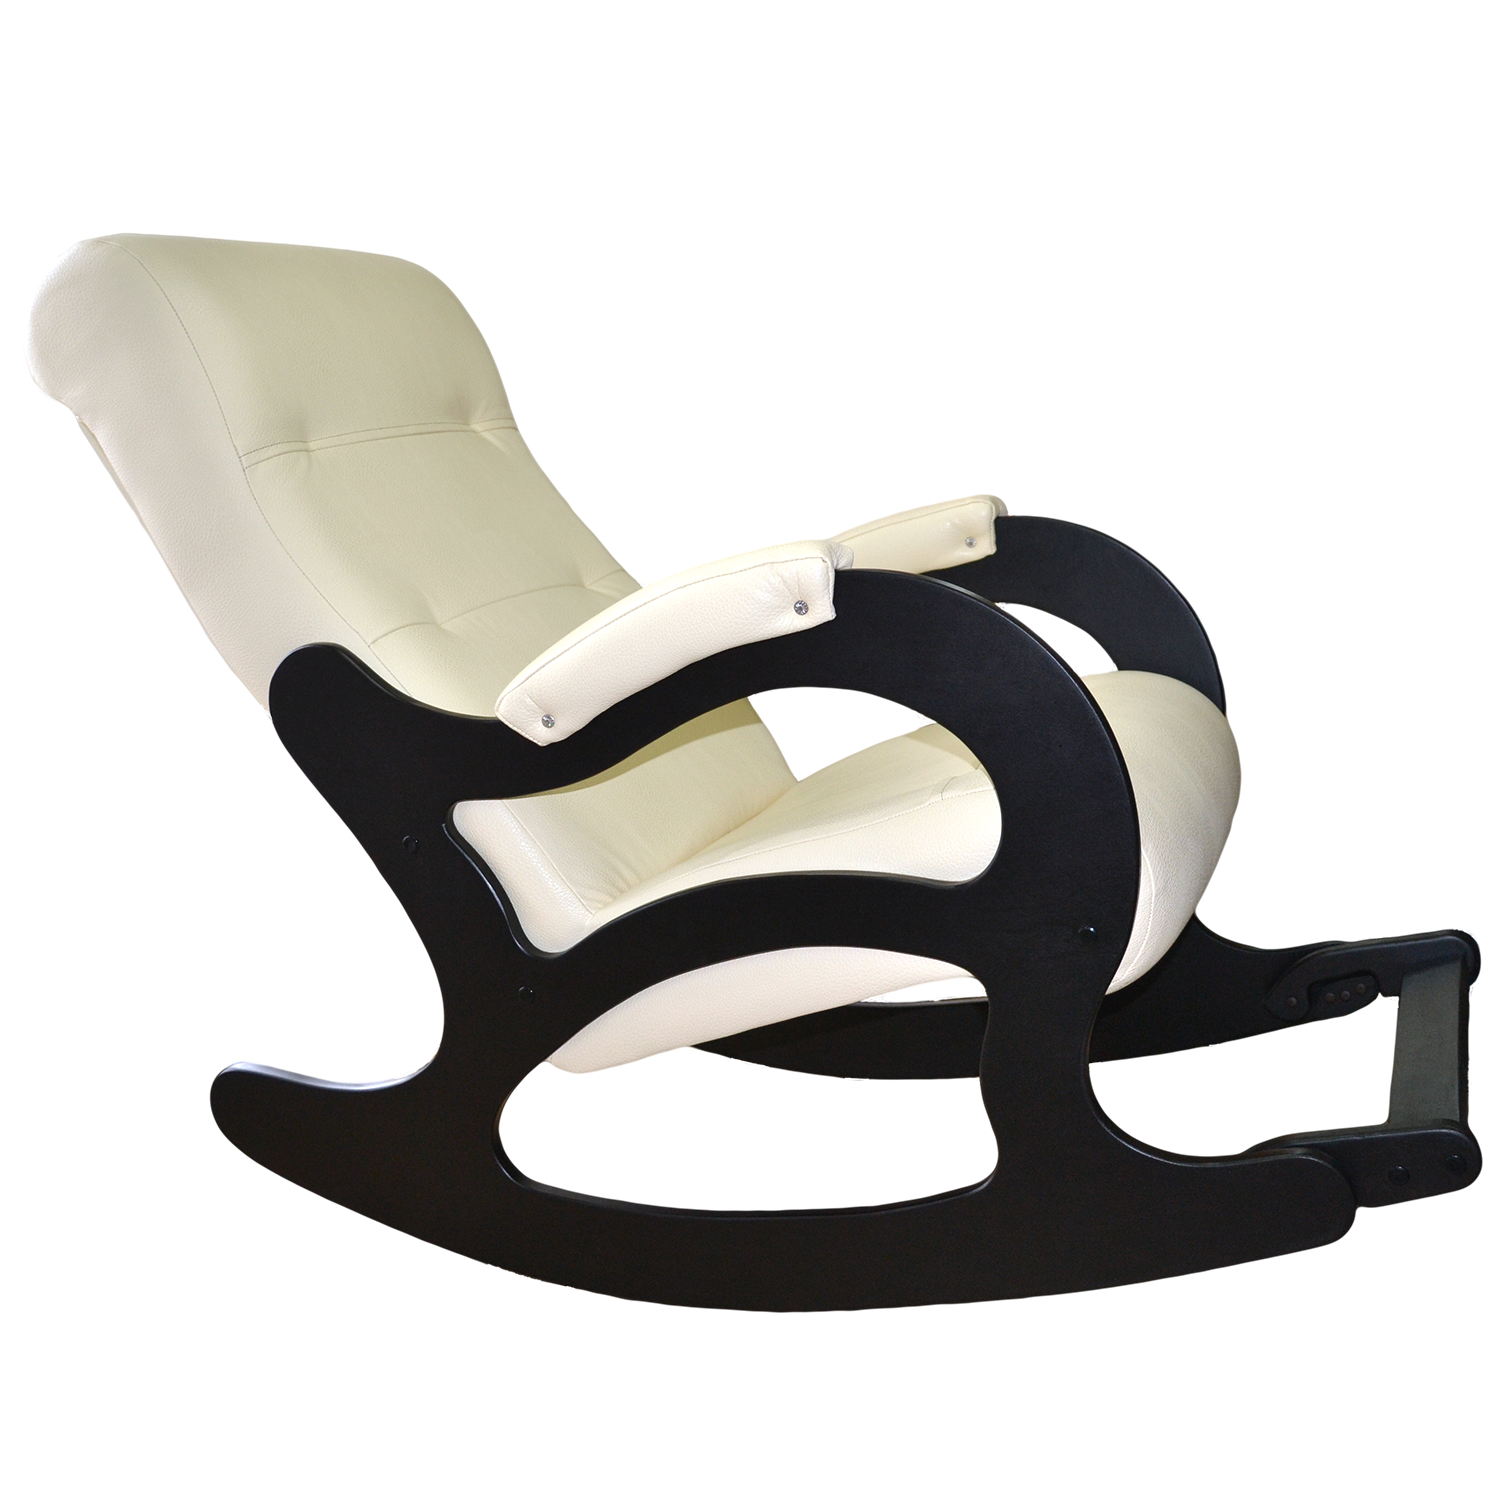 Rocking chair PNG